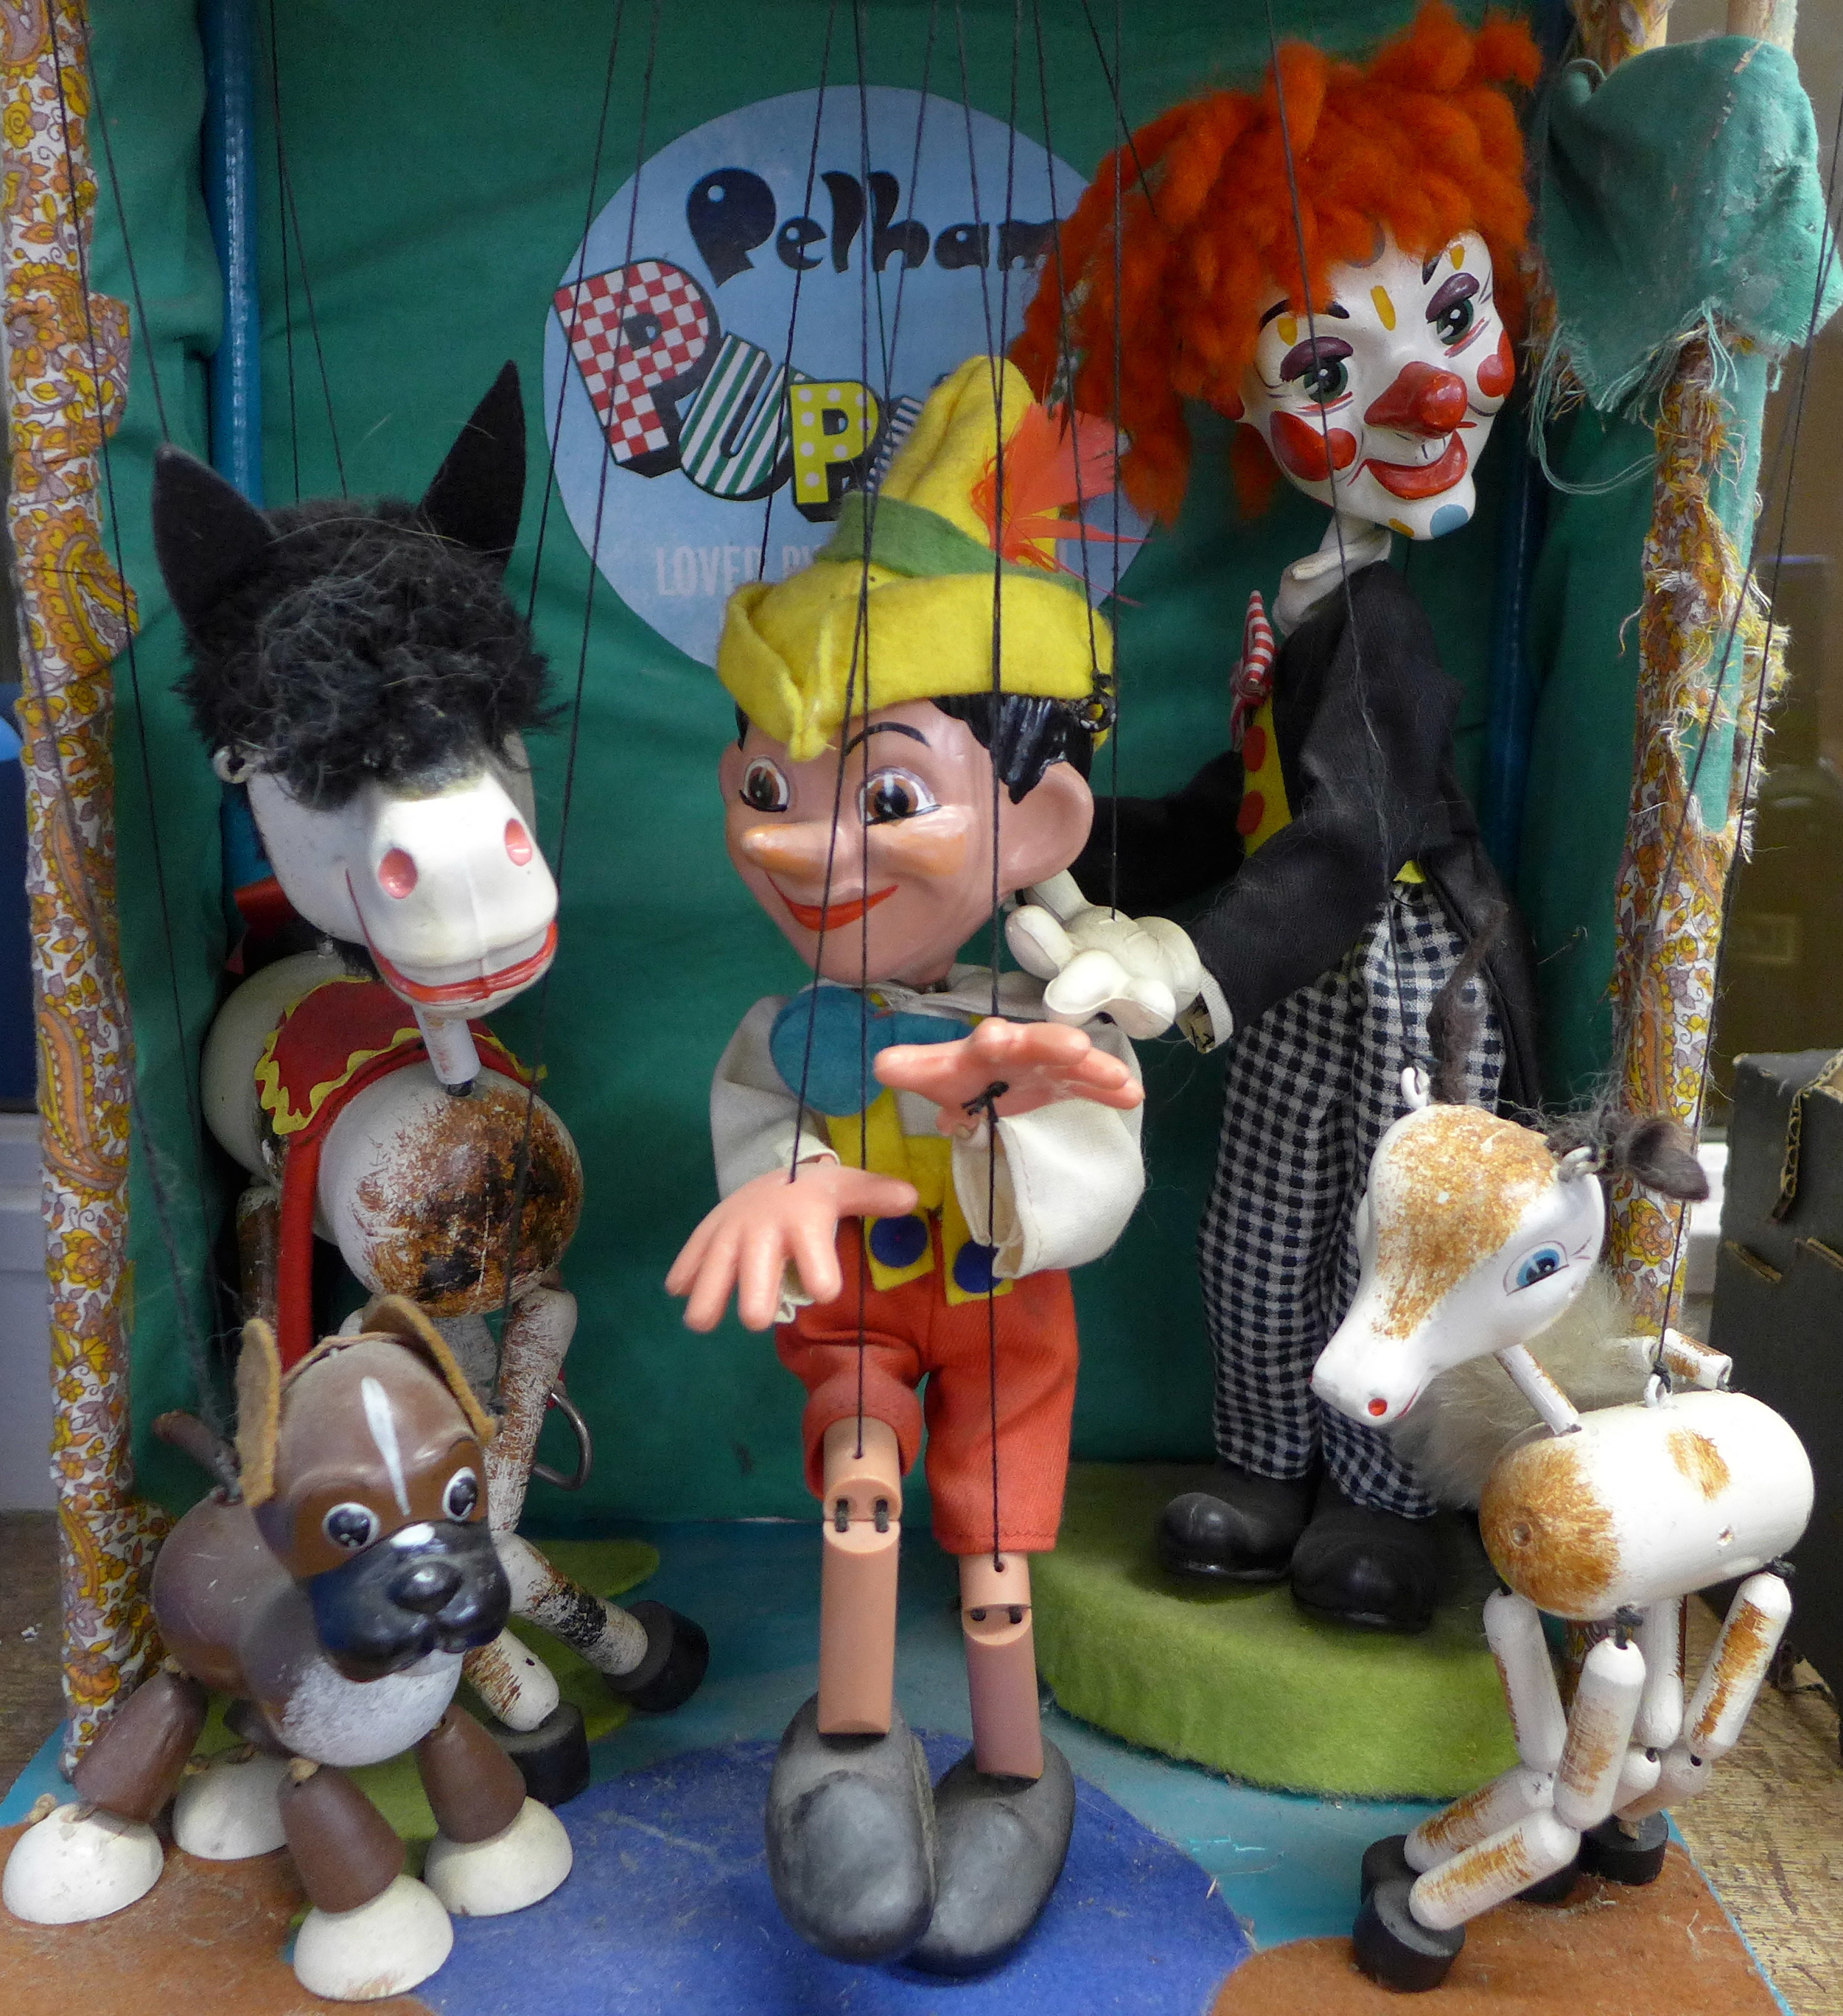 A Pelham Puppet theatre display with five Pelham puppets - Image 2 of 6